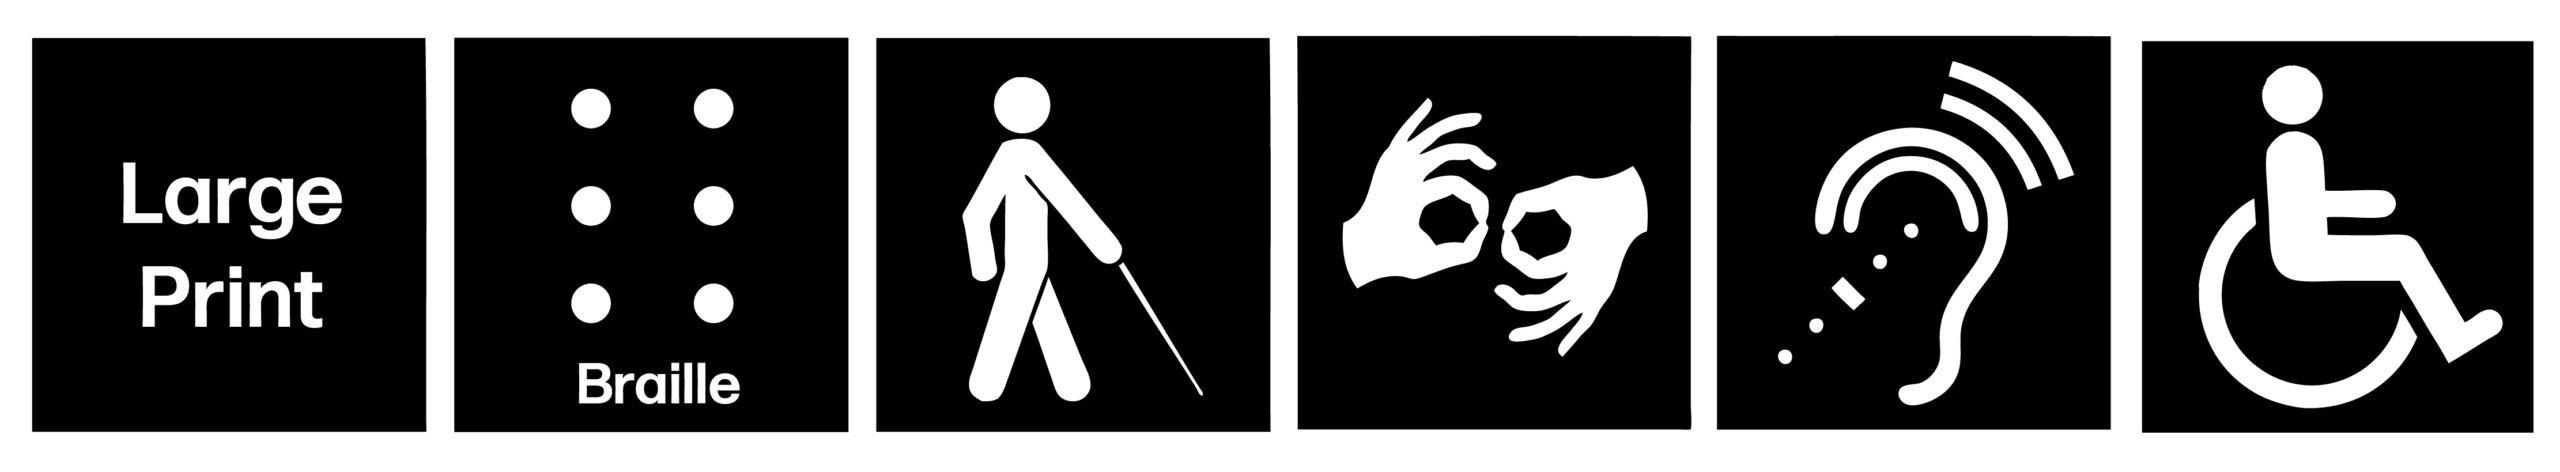 Six black squares with accessibility symbols in white. From left to right are the symbols for, accessible print, braille, access to low vision, sign language interpretation, access for hearing loss, and the symbol of accessibility.